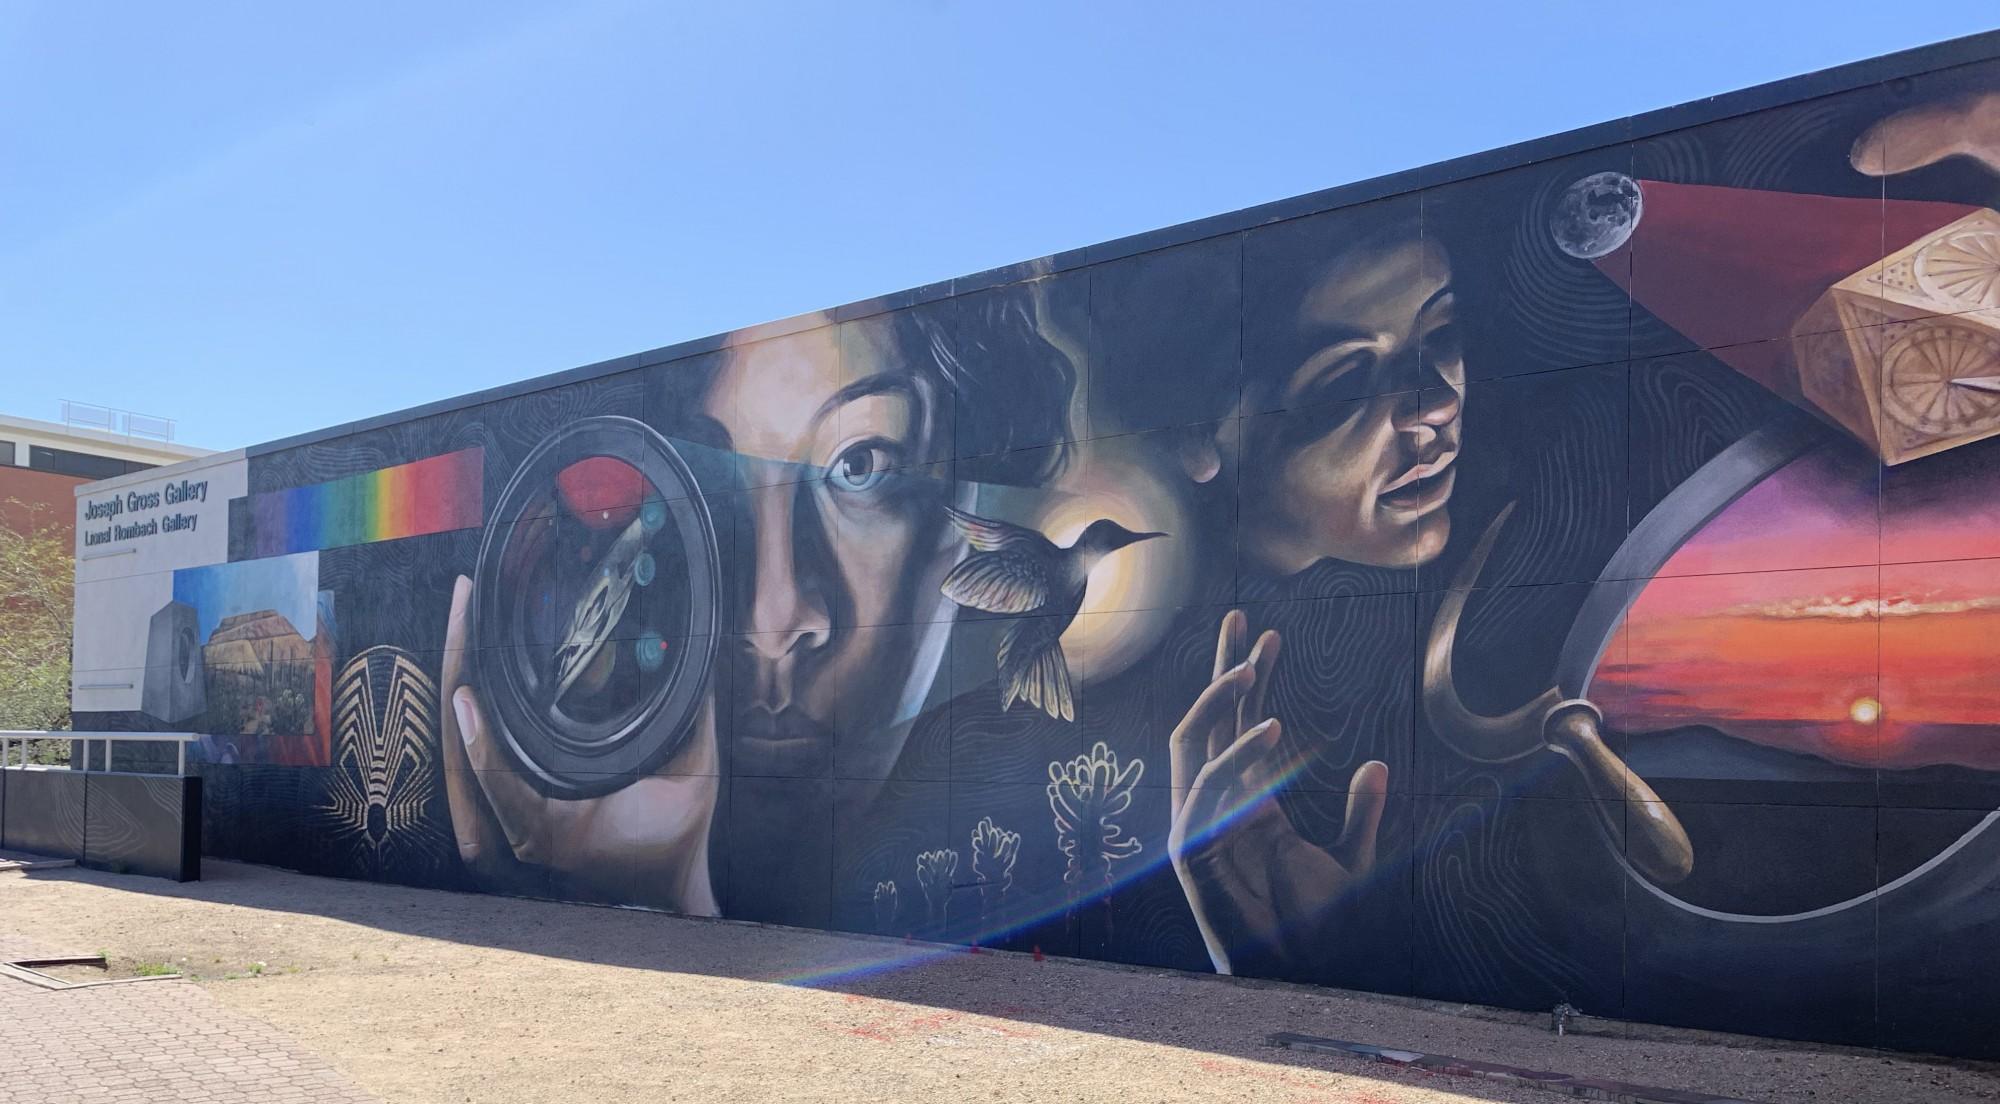 School of Art Mural by Karlito Miller Espinosa 2021. Speedway Boulevard and North Mountain Ave, Tucson, AZ. (Photograph by Lizette Arias)